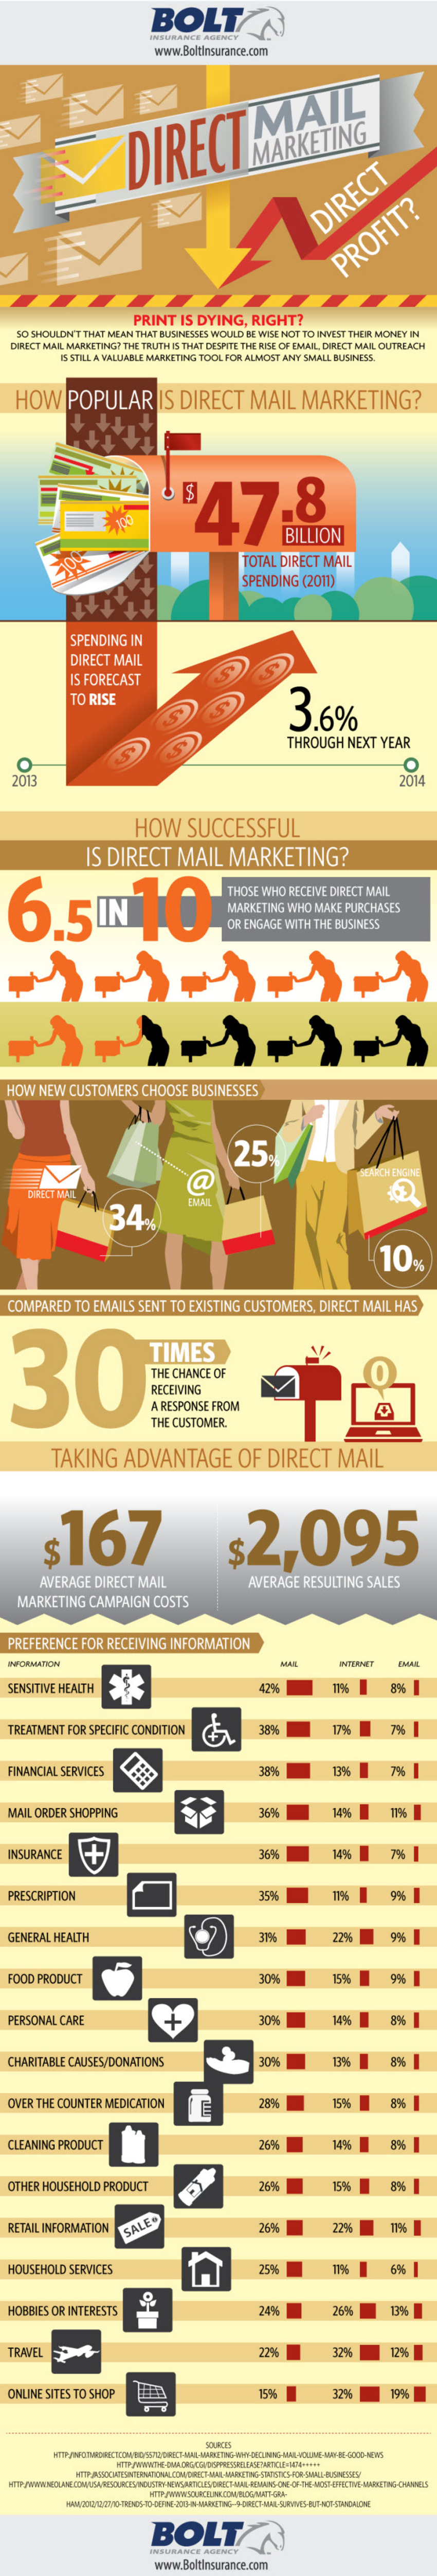 Direct Mail Marketing, Direct Profit? [Infographic] - Profs | #TheMarketingAutomationAlert | The MarTech Digest | Scoop.it